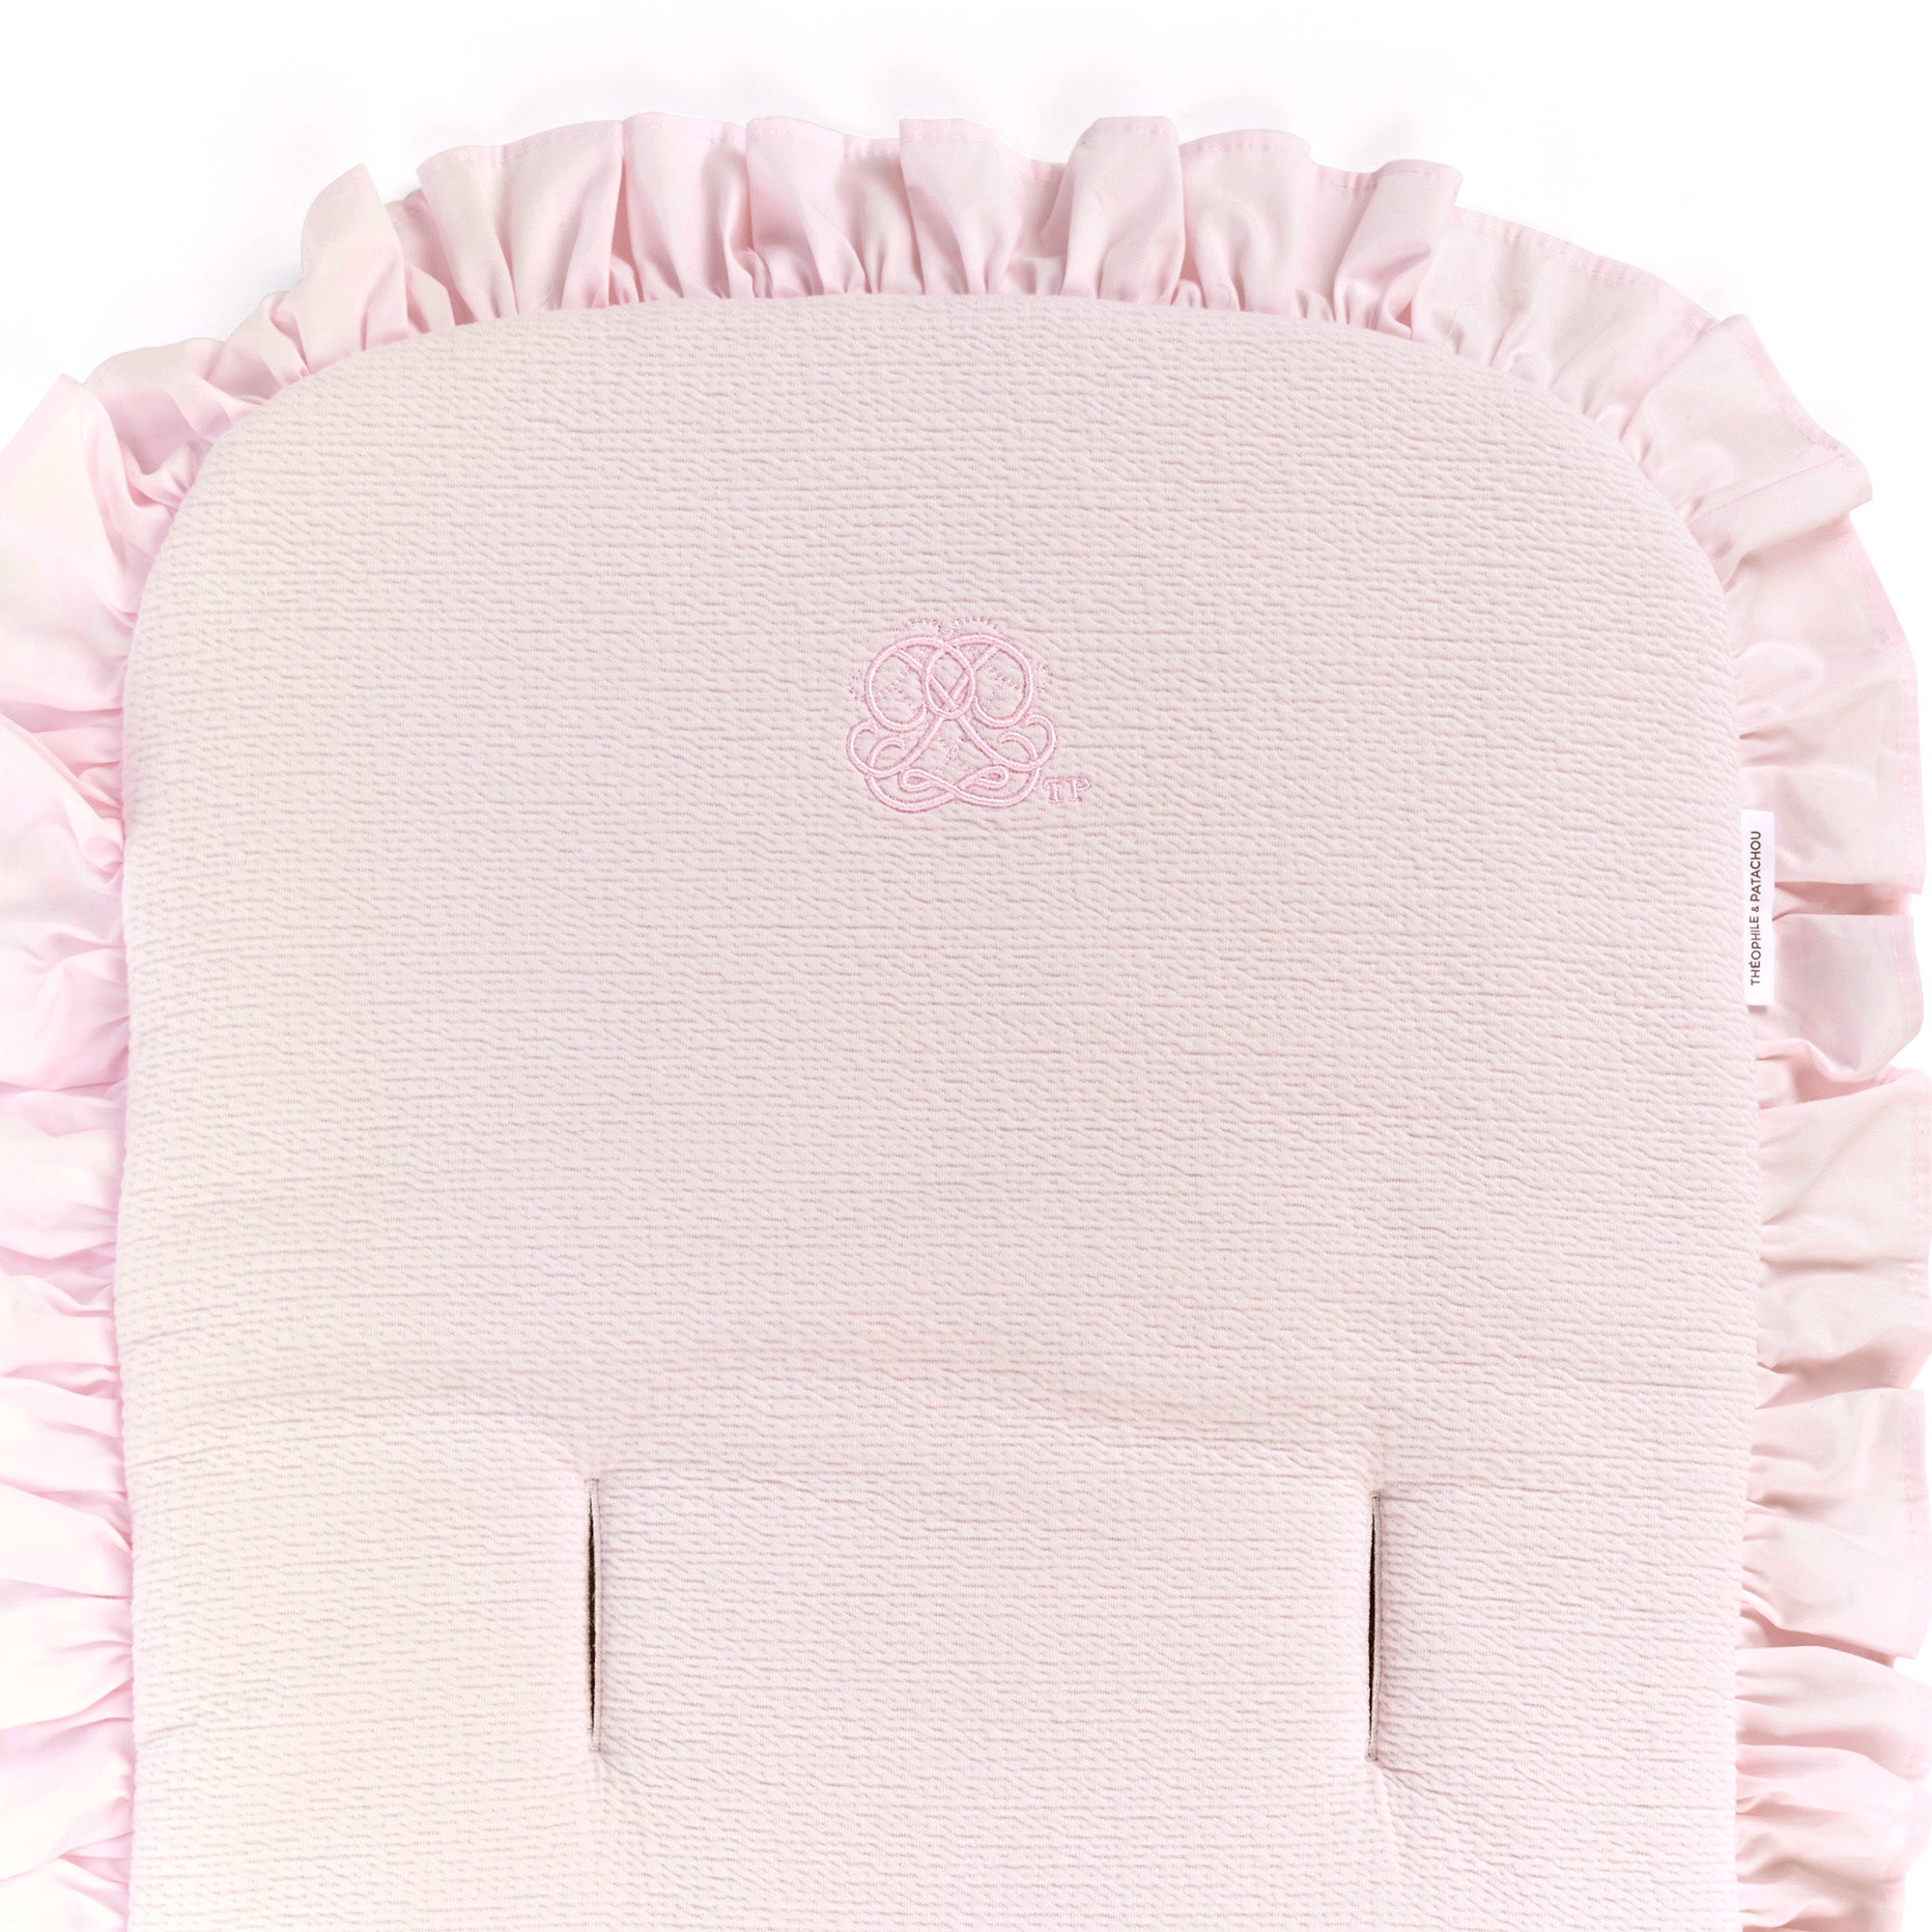 Theophile & Patachou Baby Seat Cover - Cotton Pink